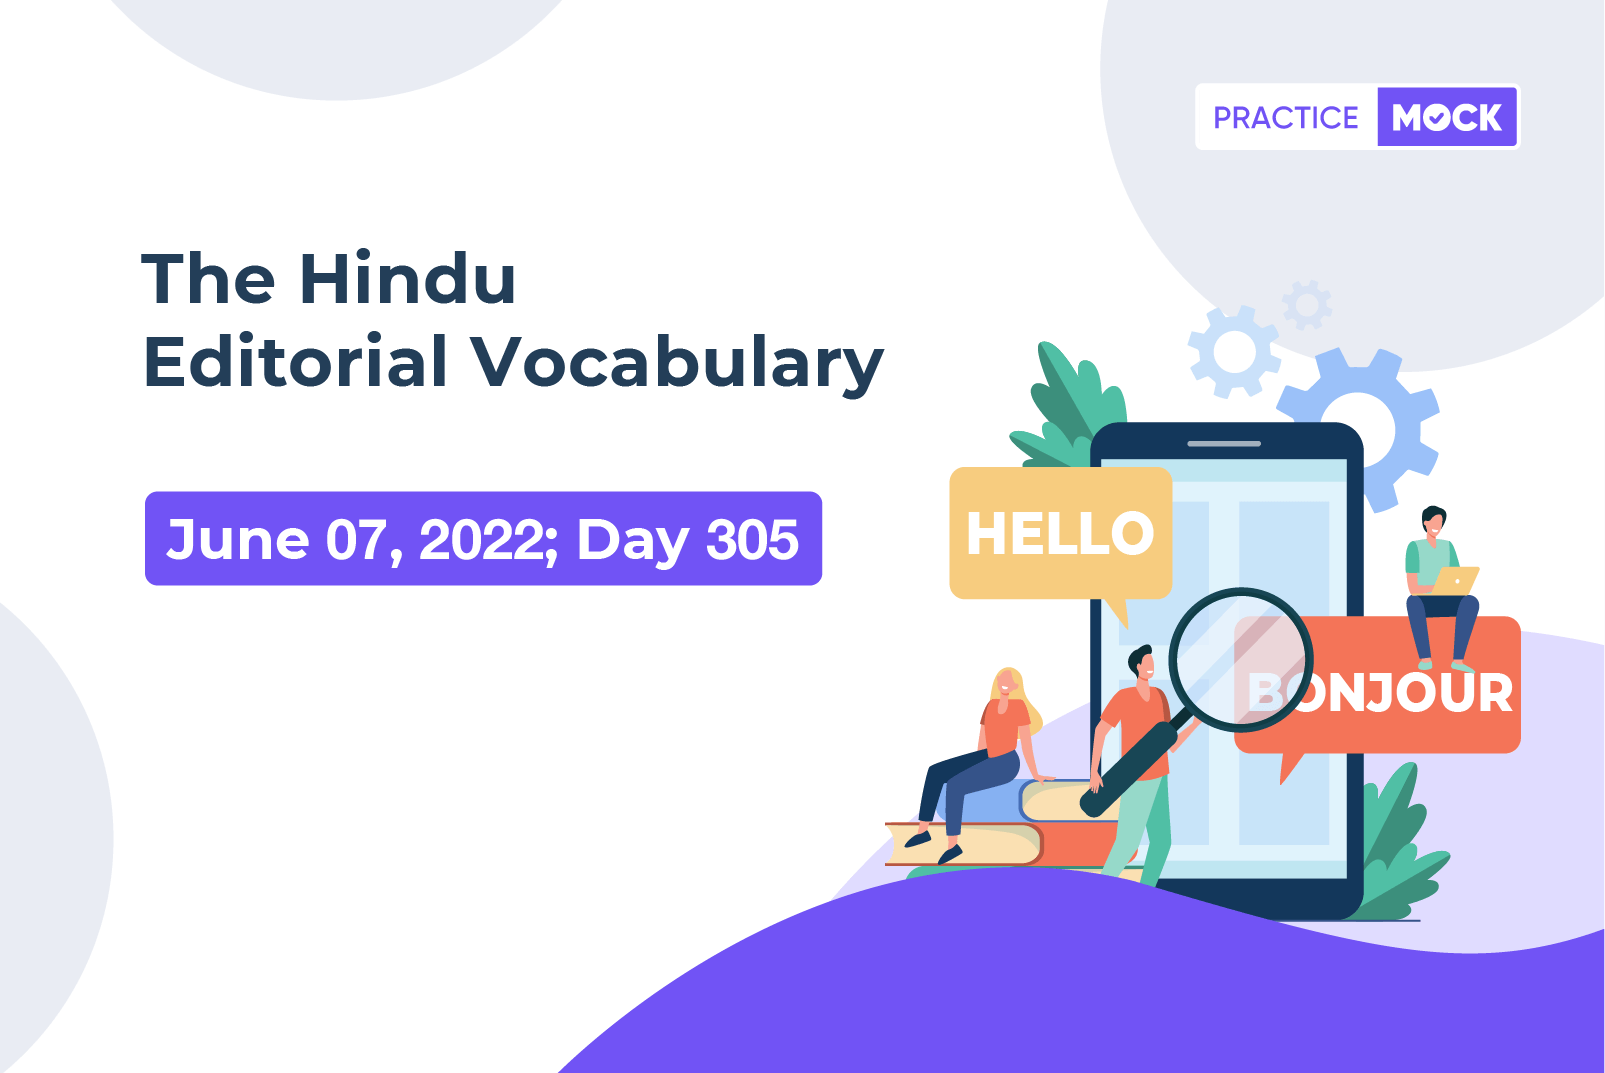 The Hindu Editorial Vocabulary in 2022